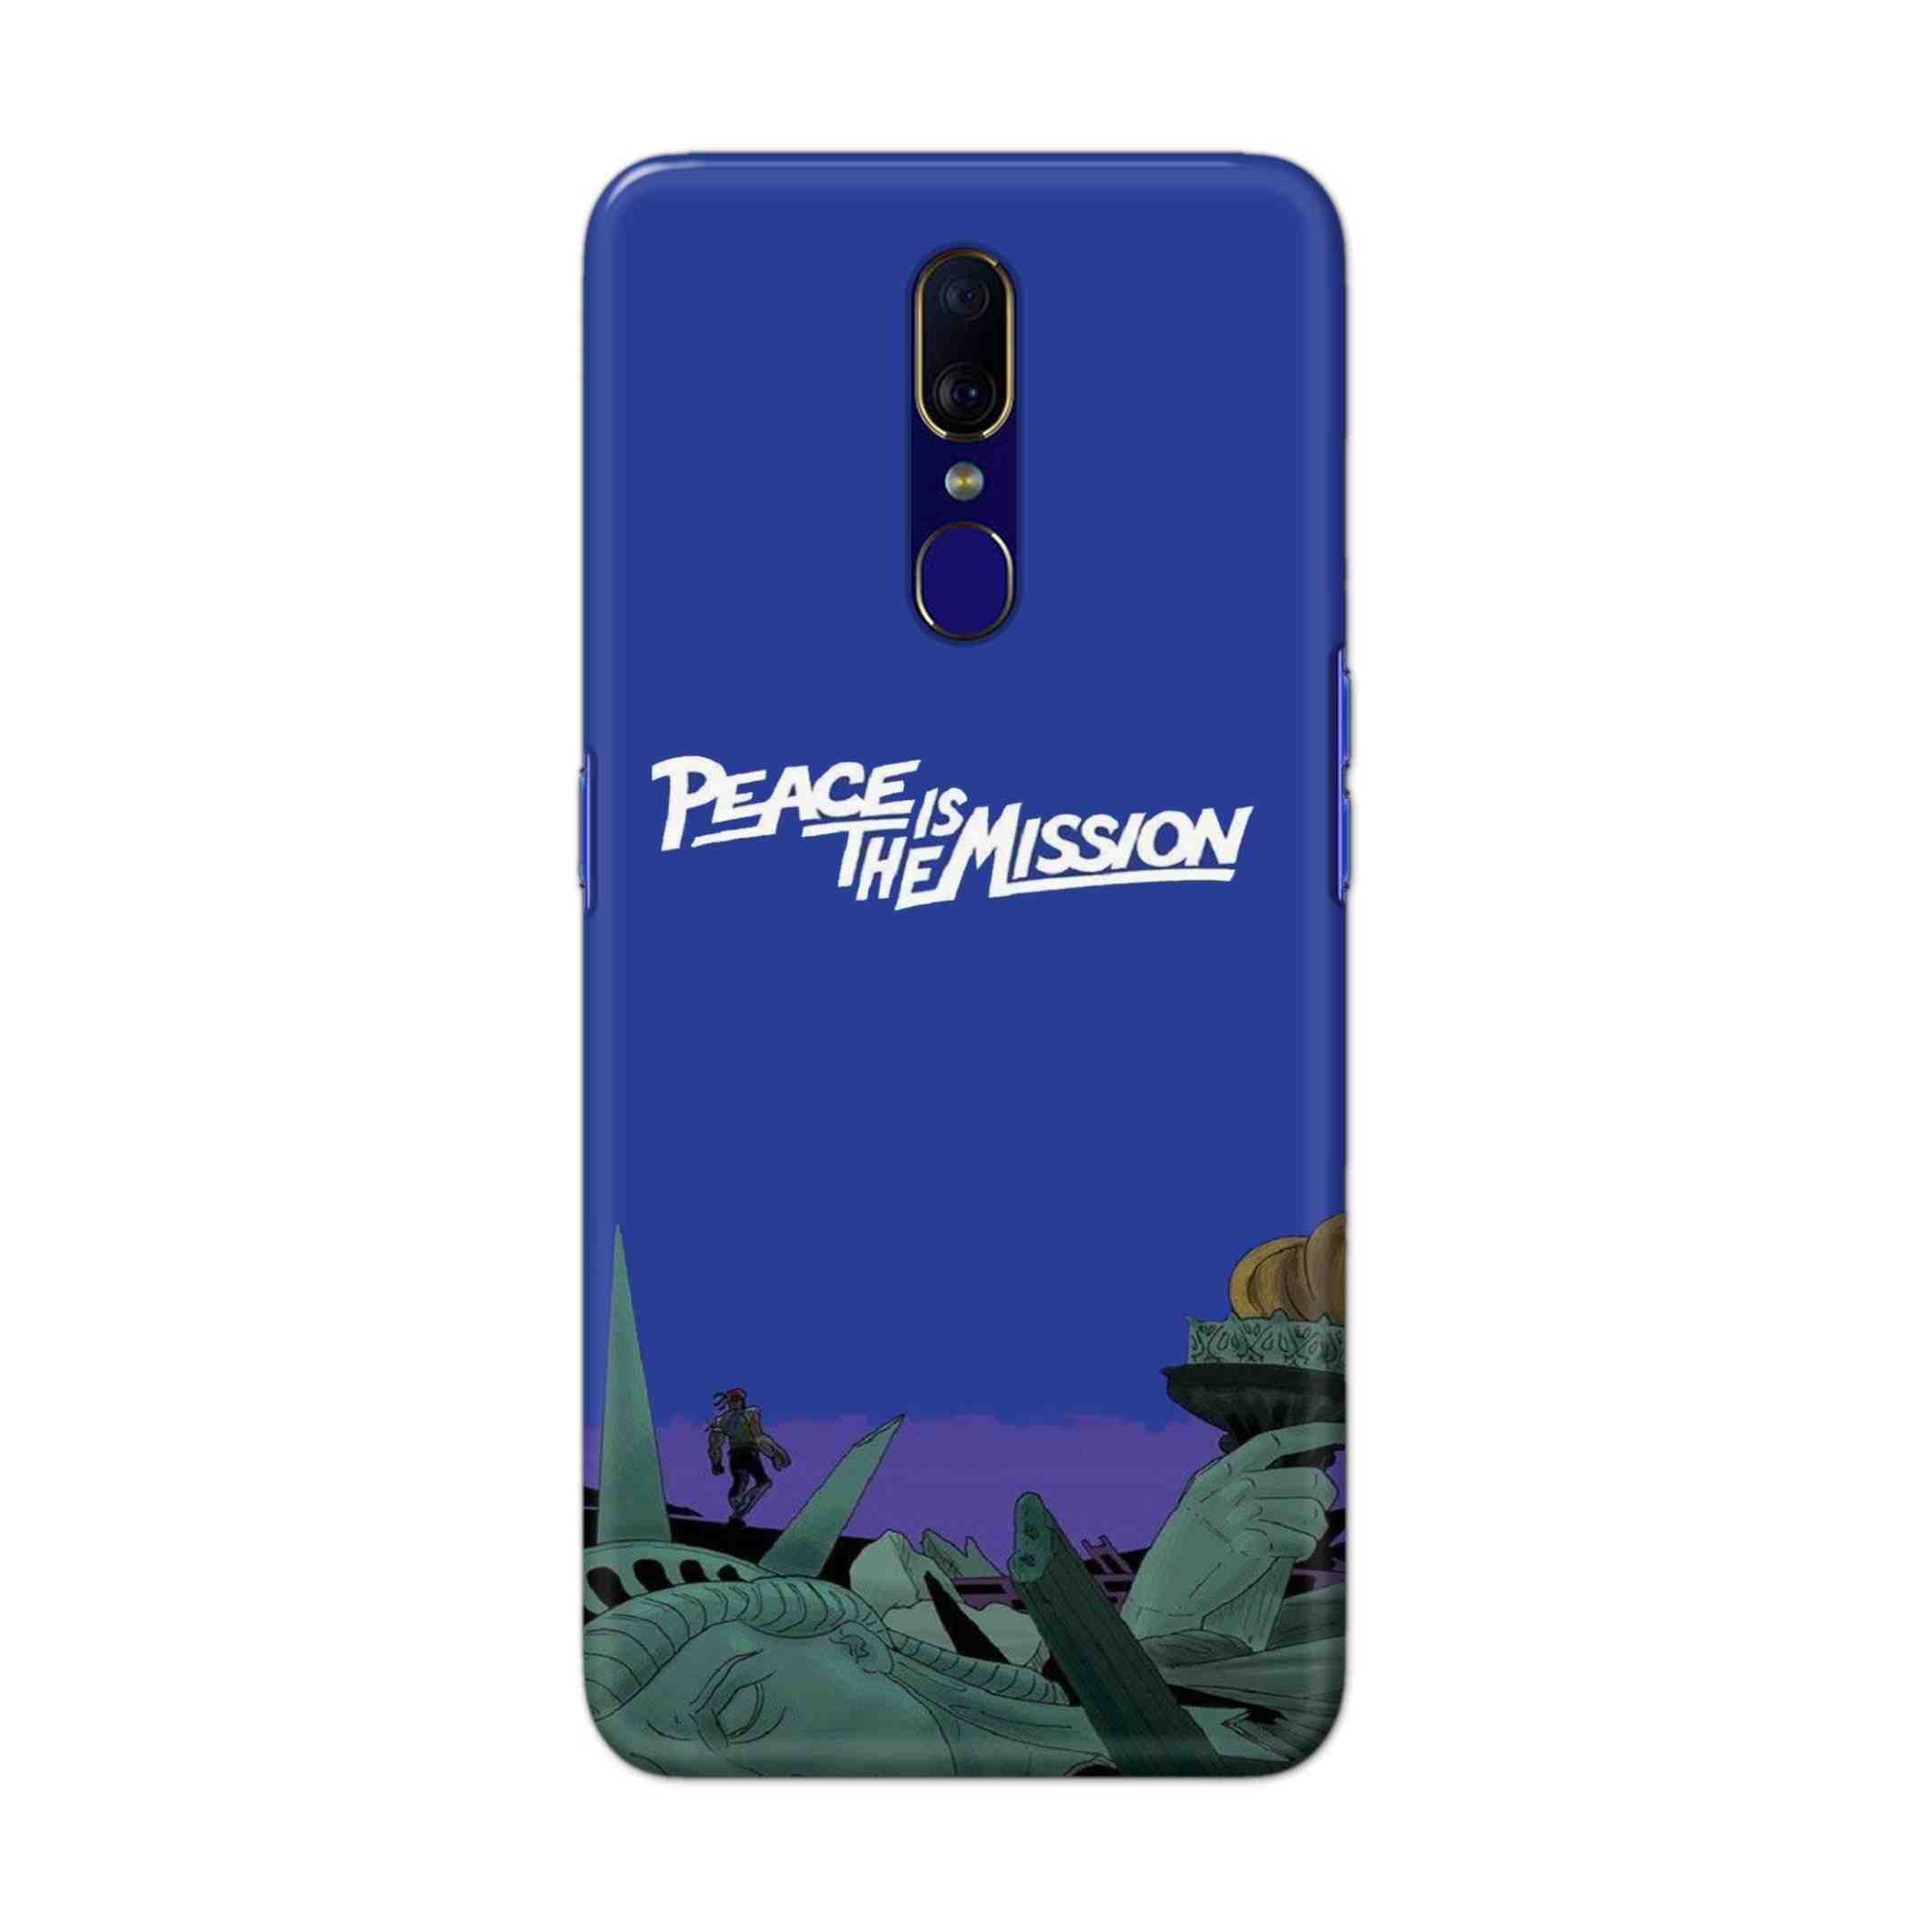 Buy Peace Is The Misson Hard Back Mobile Phone Case Cover For OPPO F11 Online